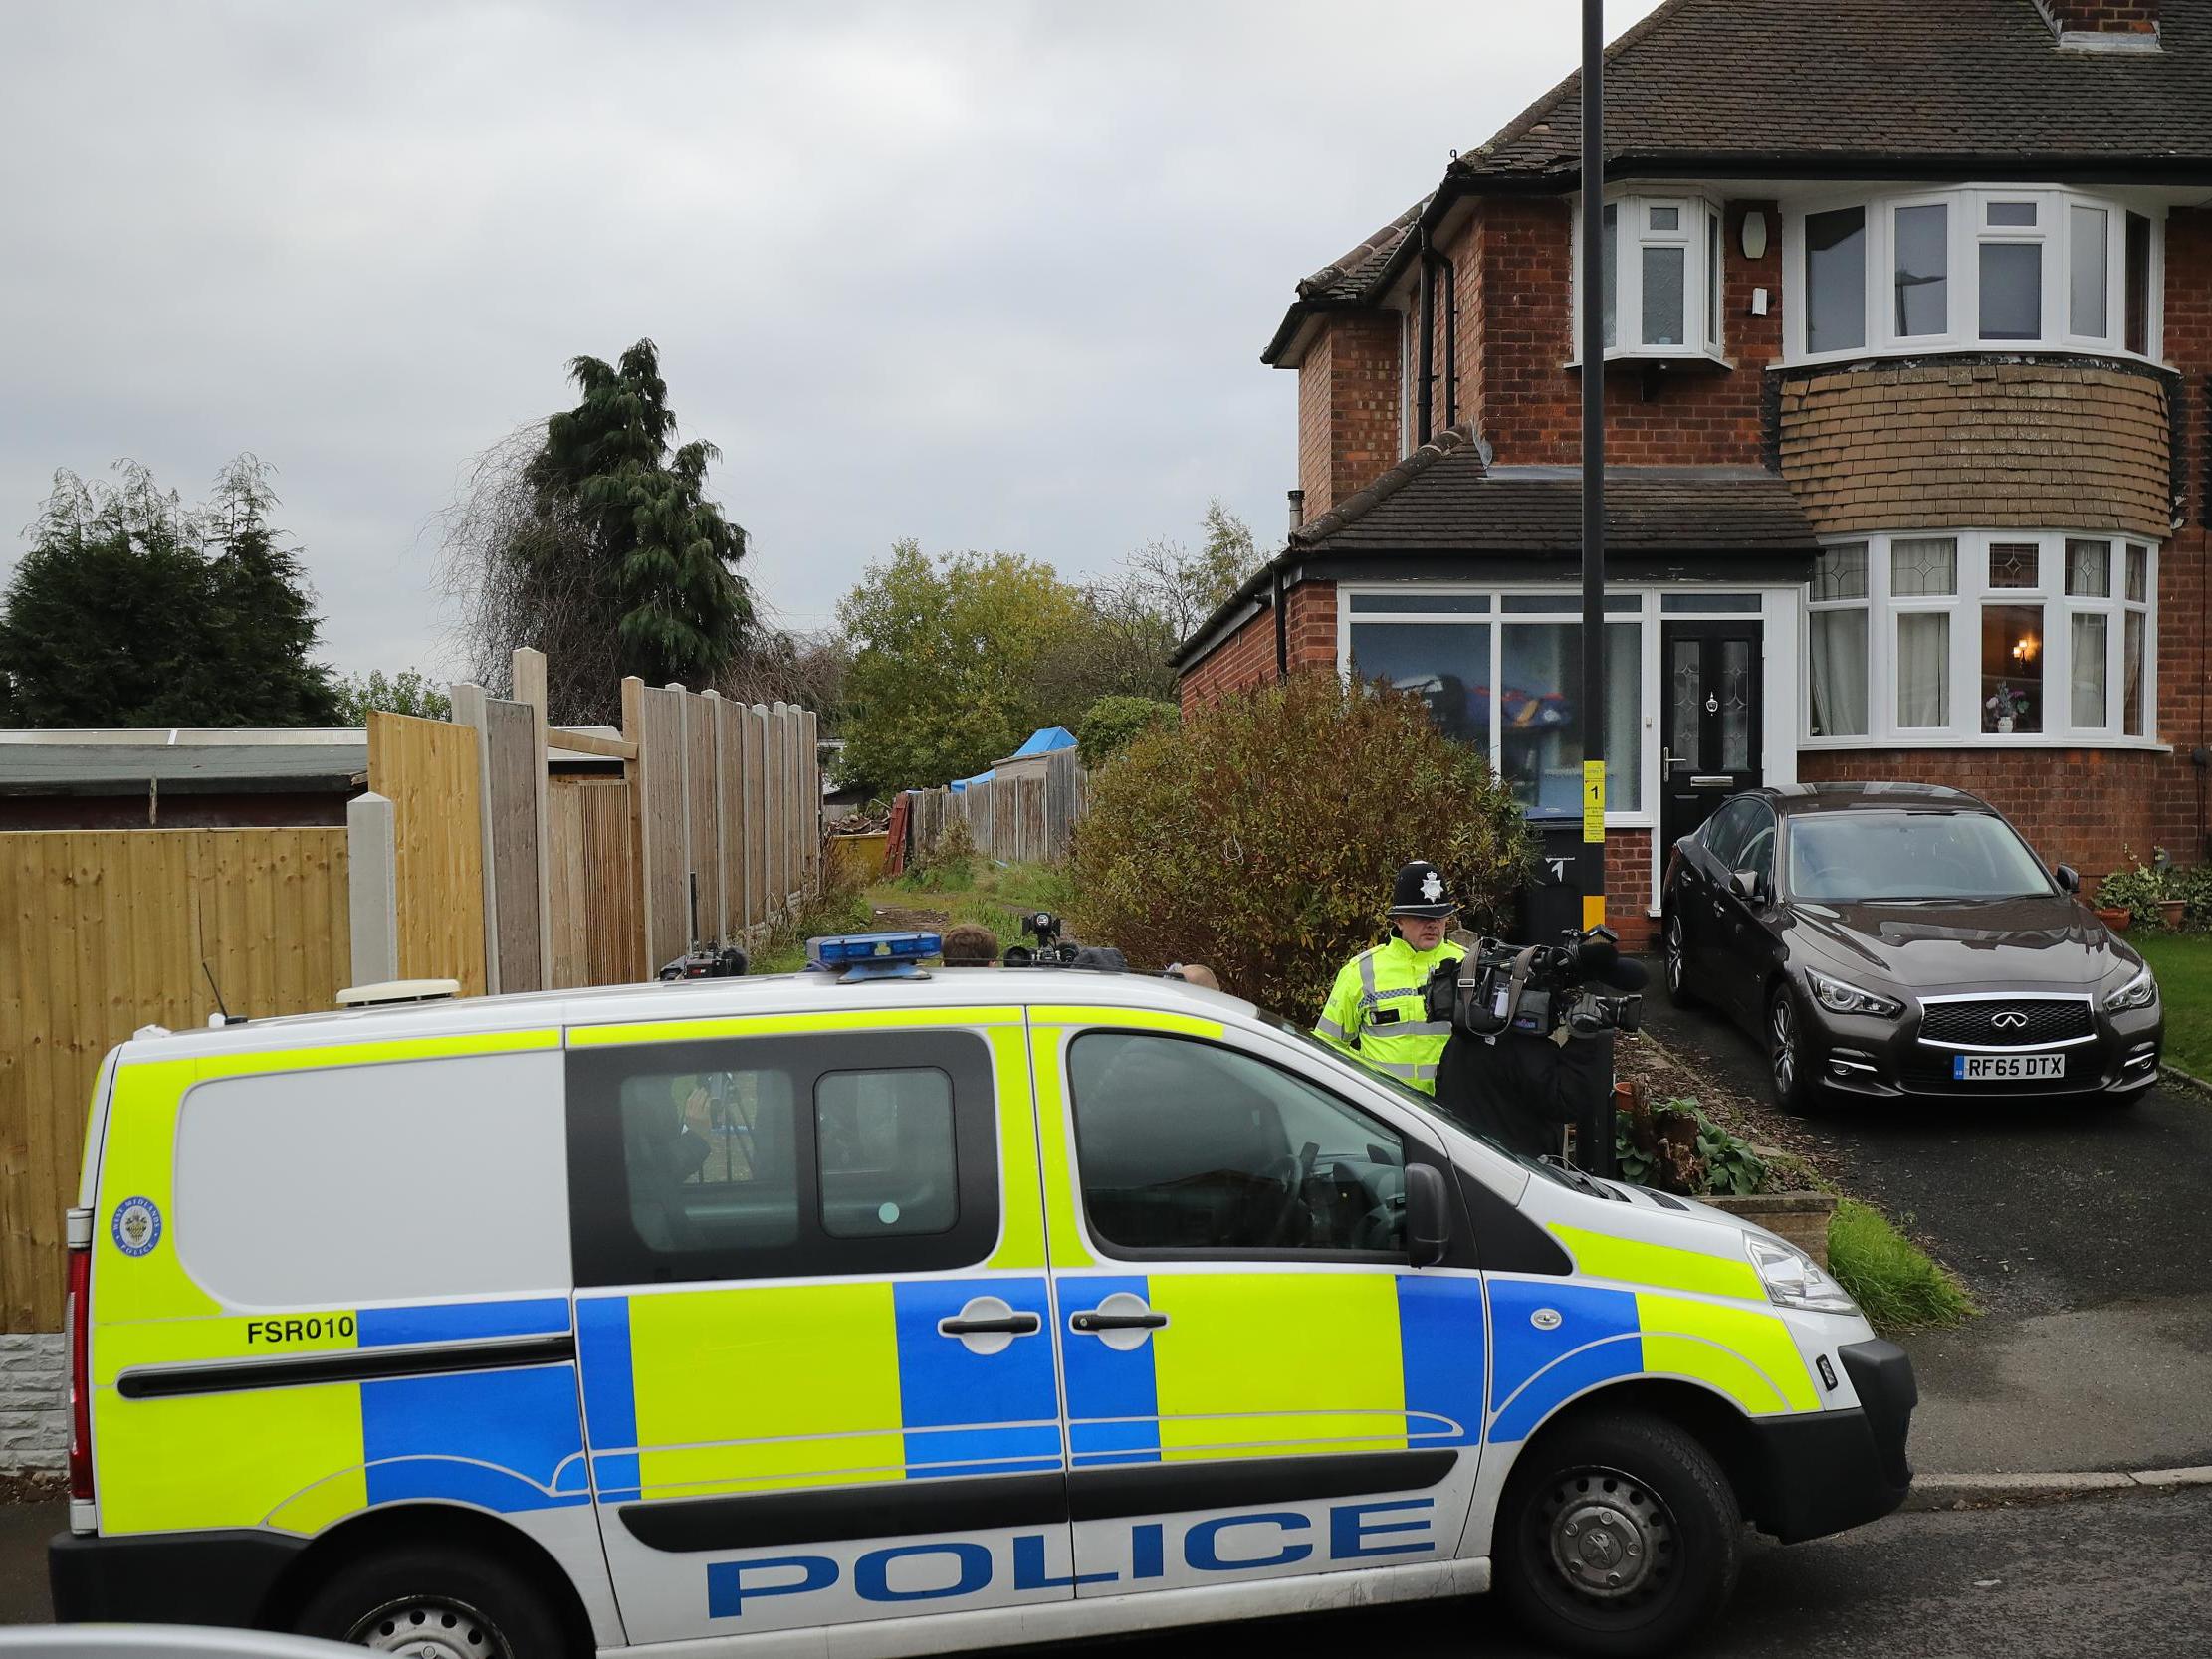 Detectives spent two weeks searching for the remains of Suzy Lamplugh at a property in Sutton Coldfield (Christopher Furlong/